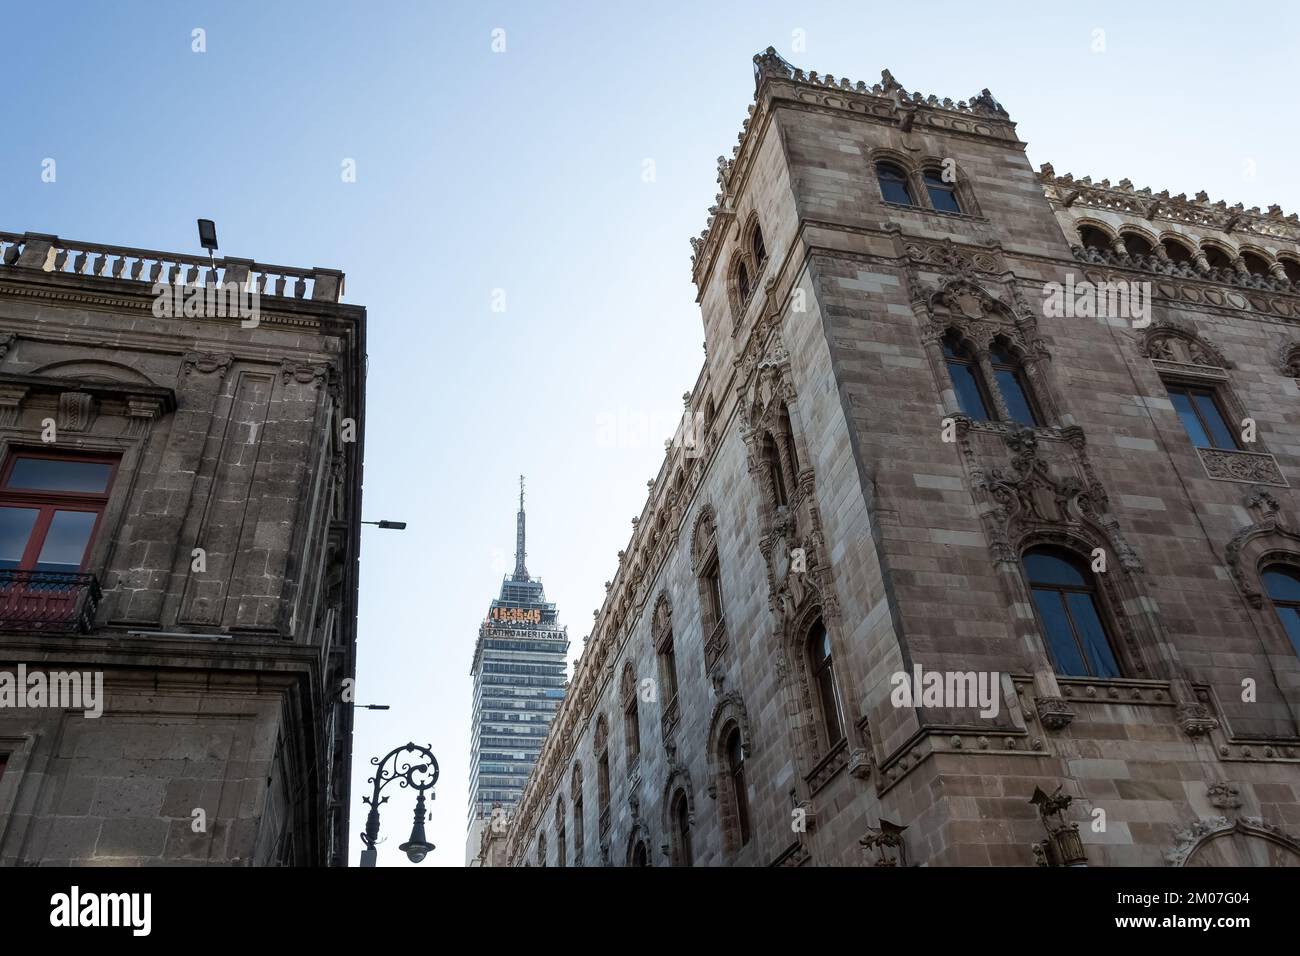 View of the historic center of Mexico City with the Palacio de Correos in the foreground and the Torre Latinoamericana in the background Stock Photo